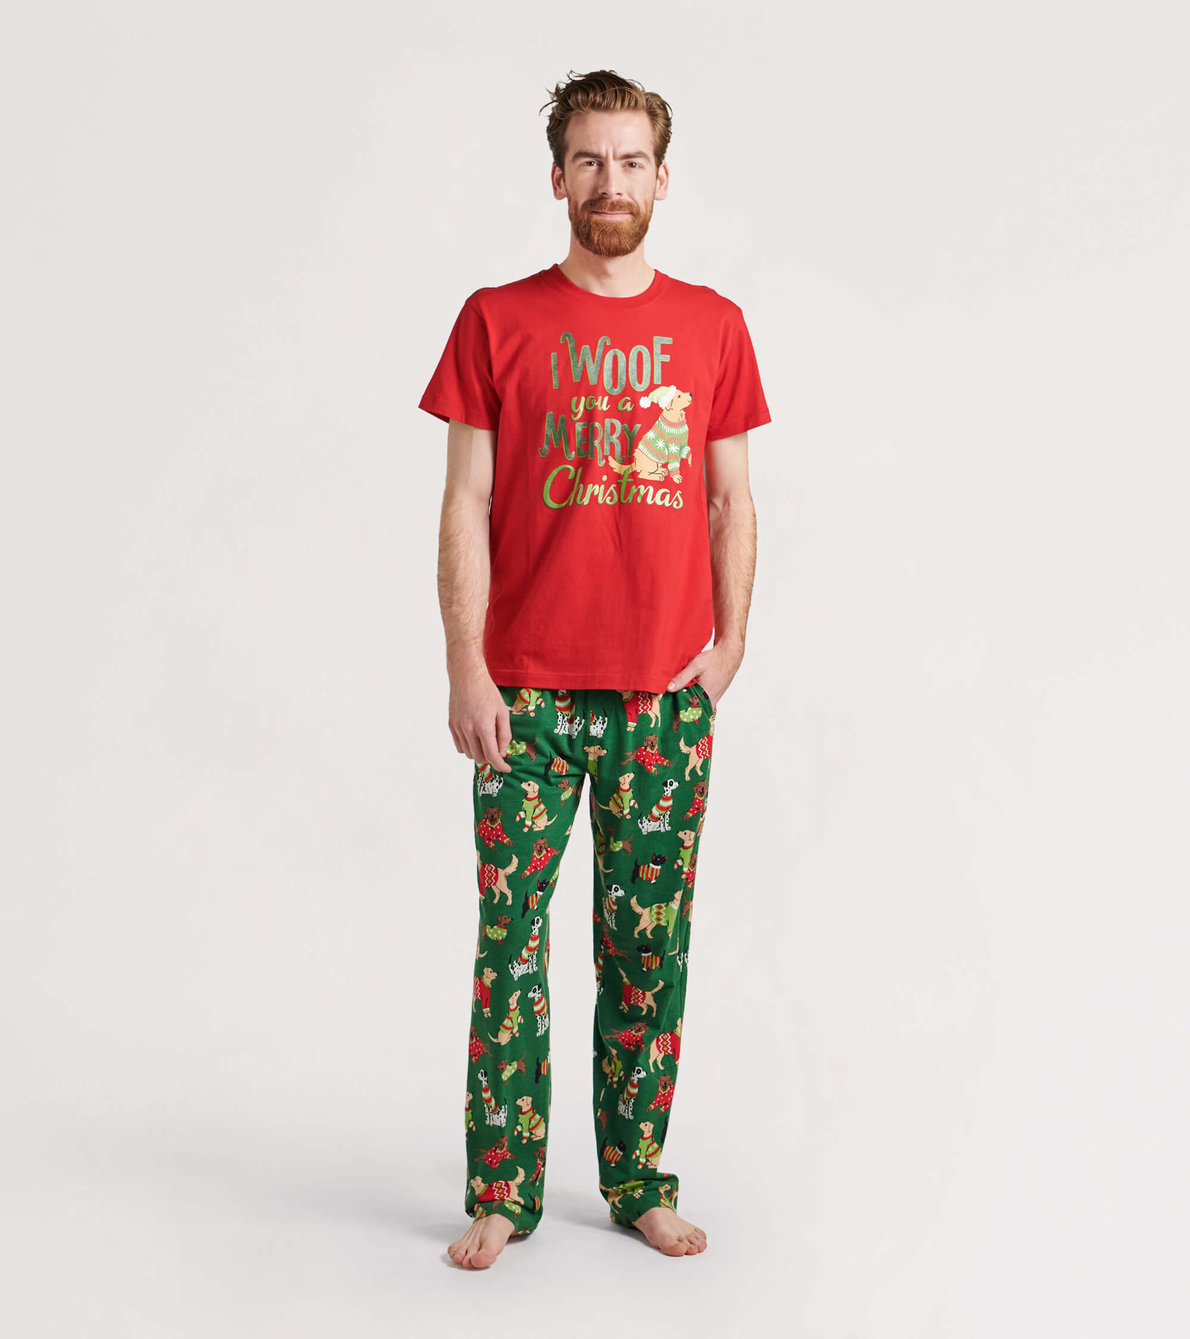 View larger image of Men's Woofing Christmas T-Shirt